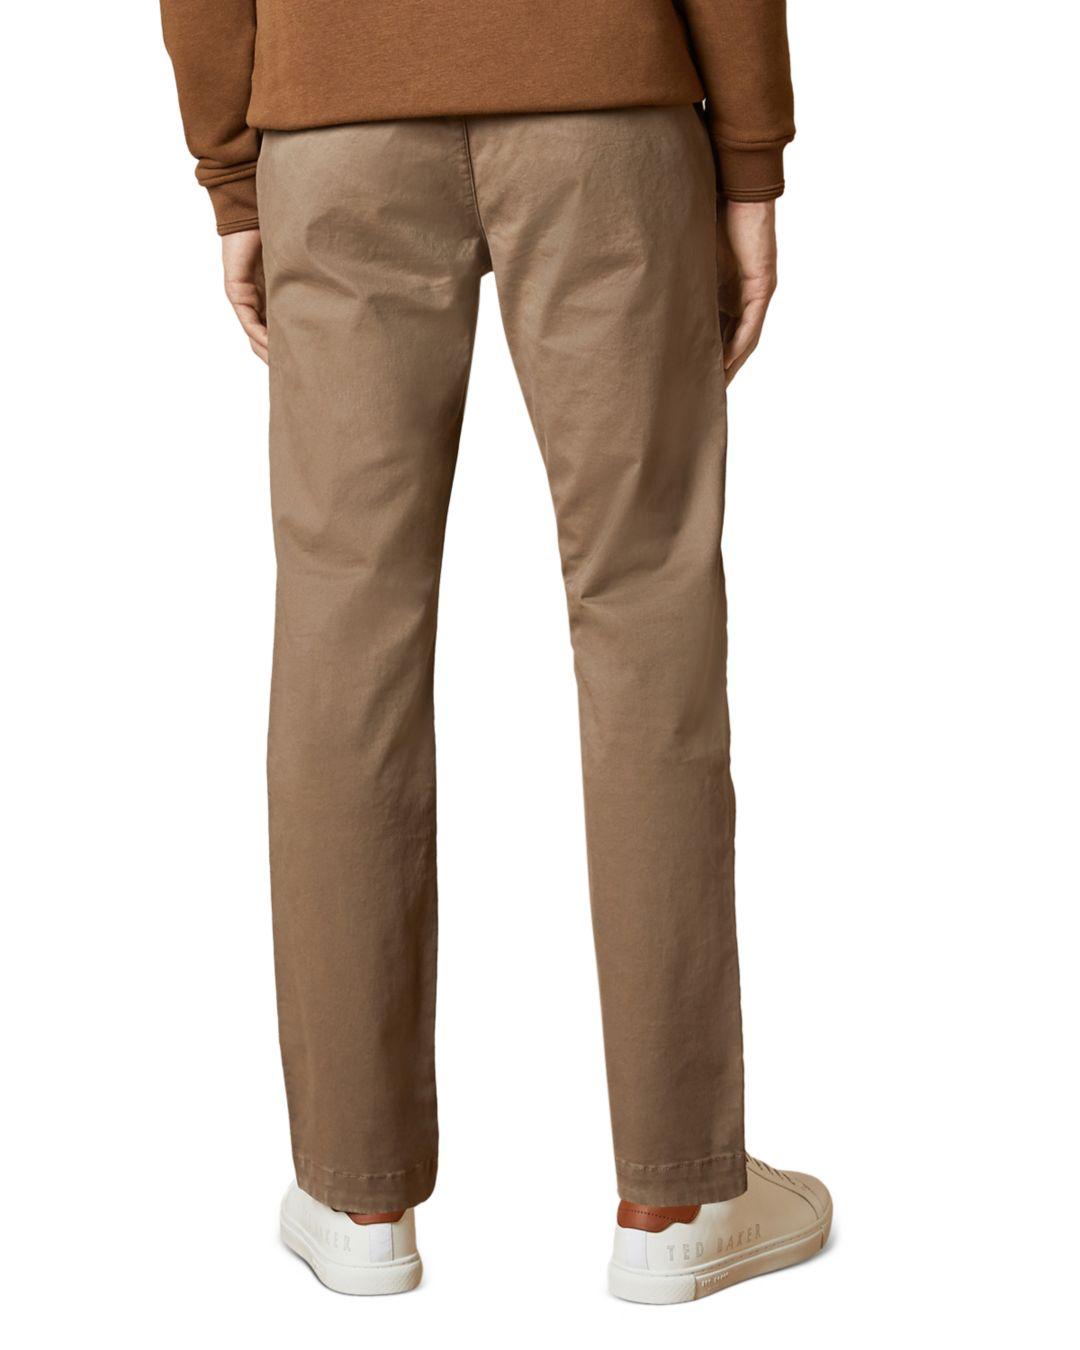 Ted Baker Cotton Ted Bake Sincere Slim Fit Chinos in Natural for Men - Lyst